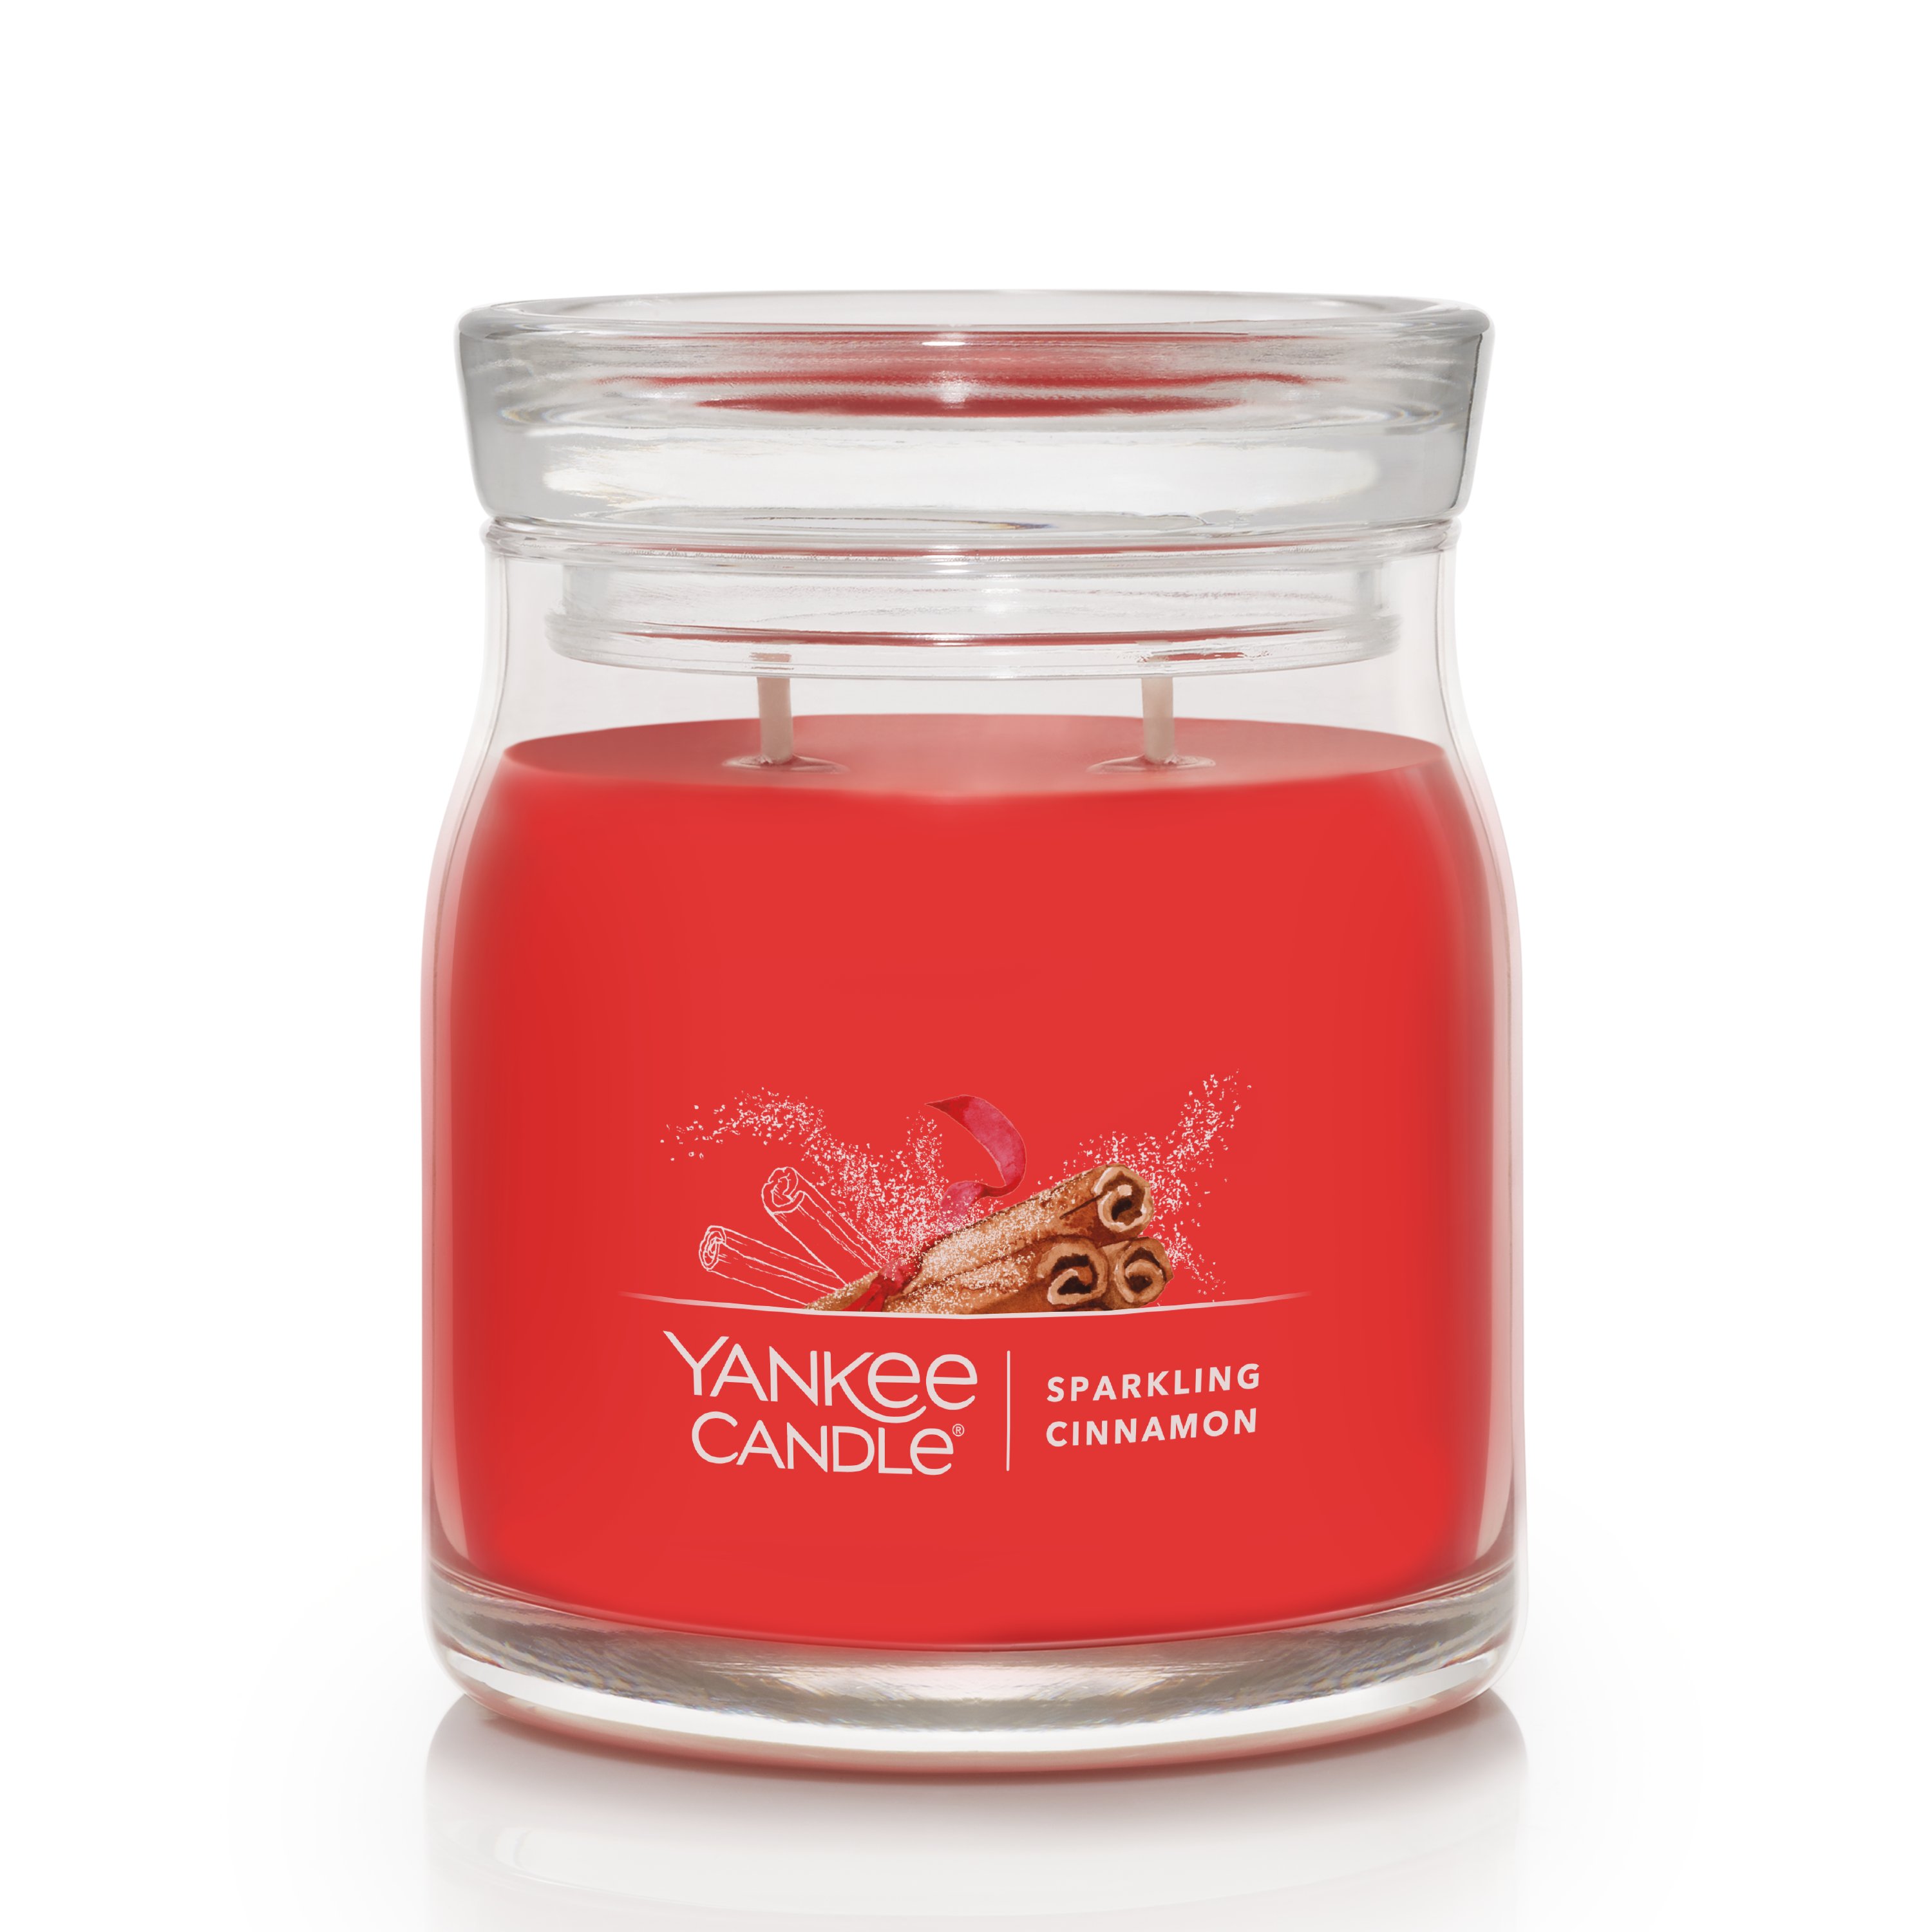 Yankee Candle Sparkling Cinnamon Scent - Each